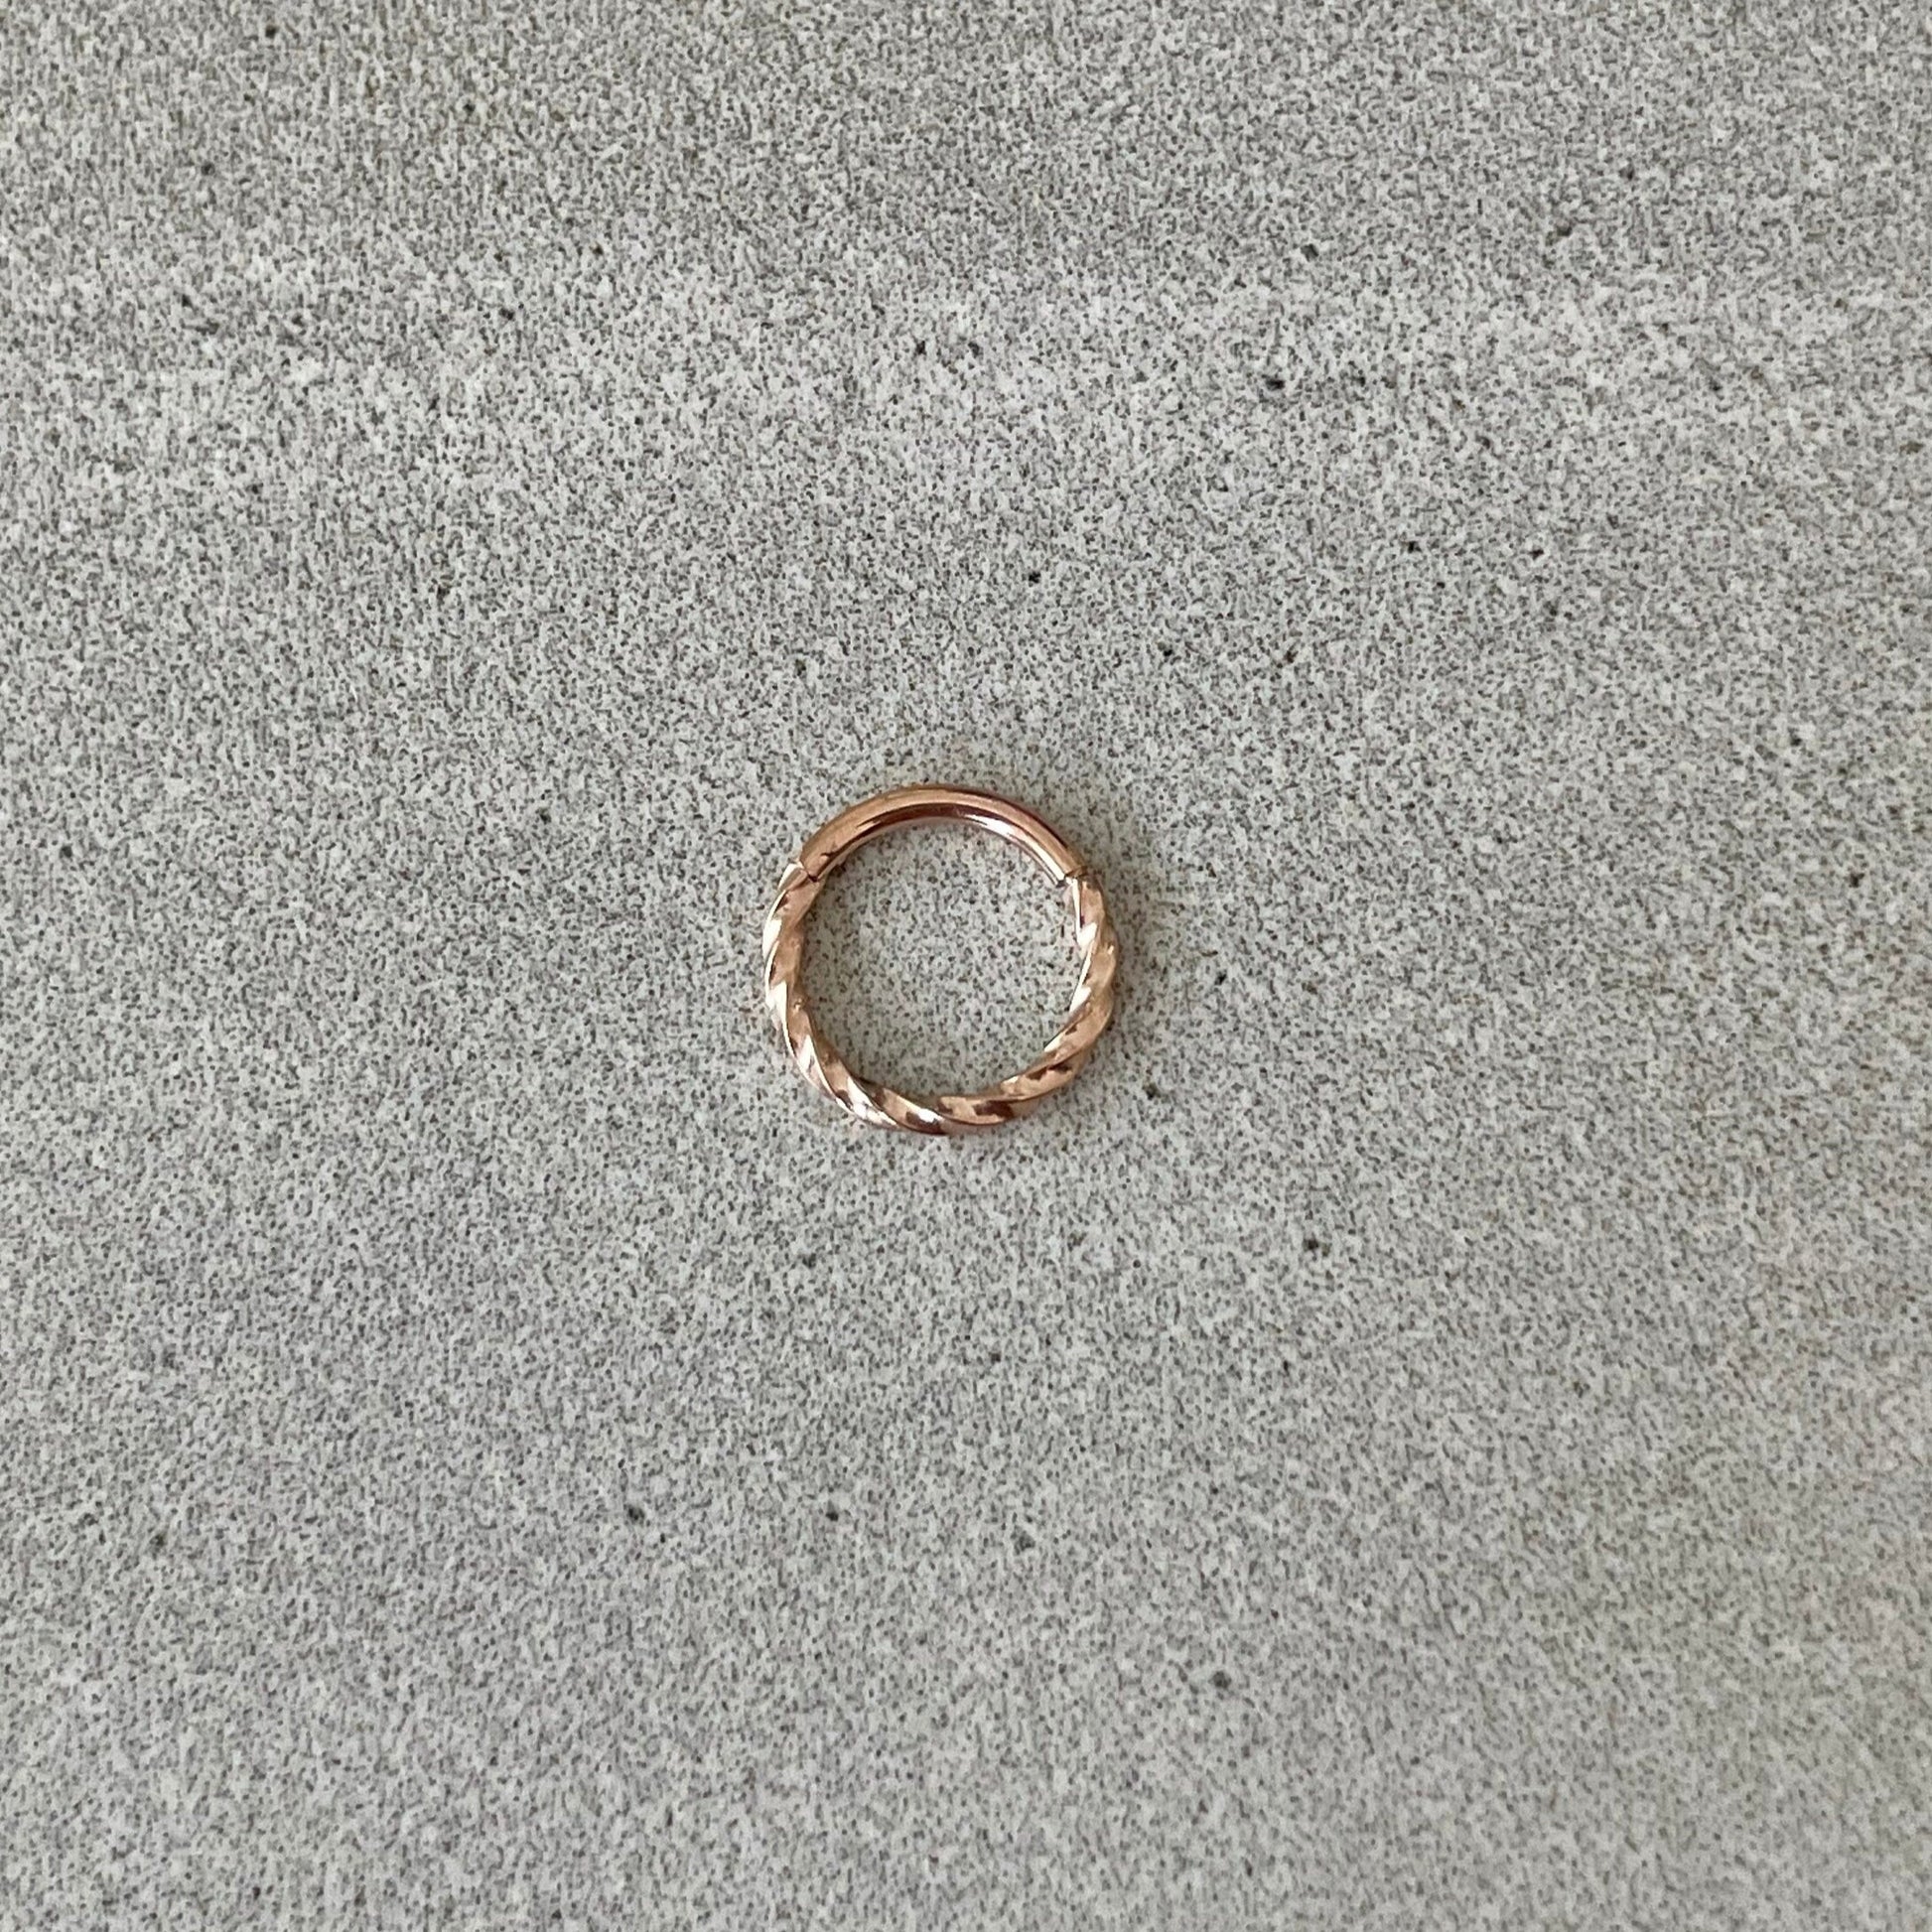 Rose Gold Twisted Septum Piercing (16G | 8mm | Surgical Steel | Rainbow, Black, Silver, Rose Gold, or Gold)